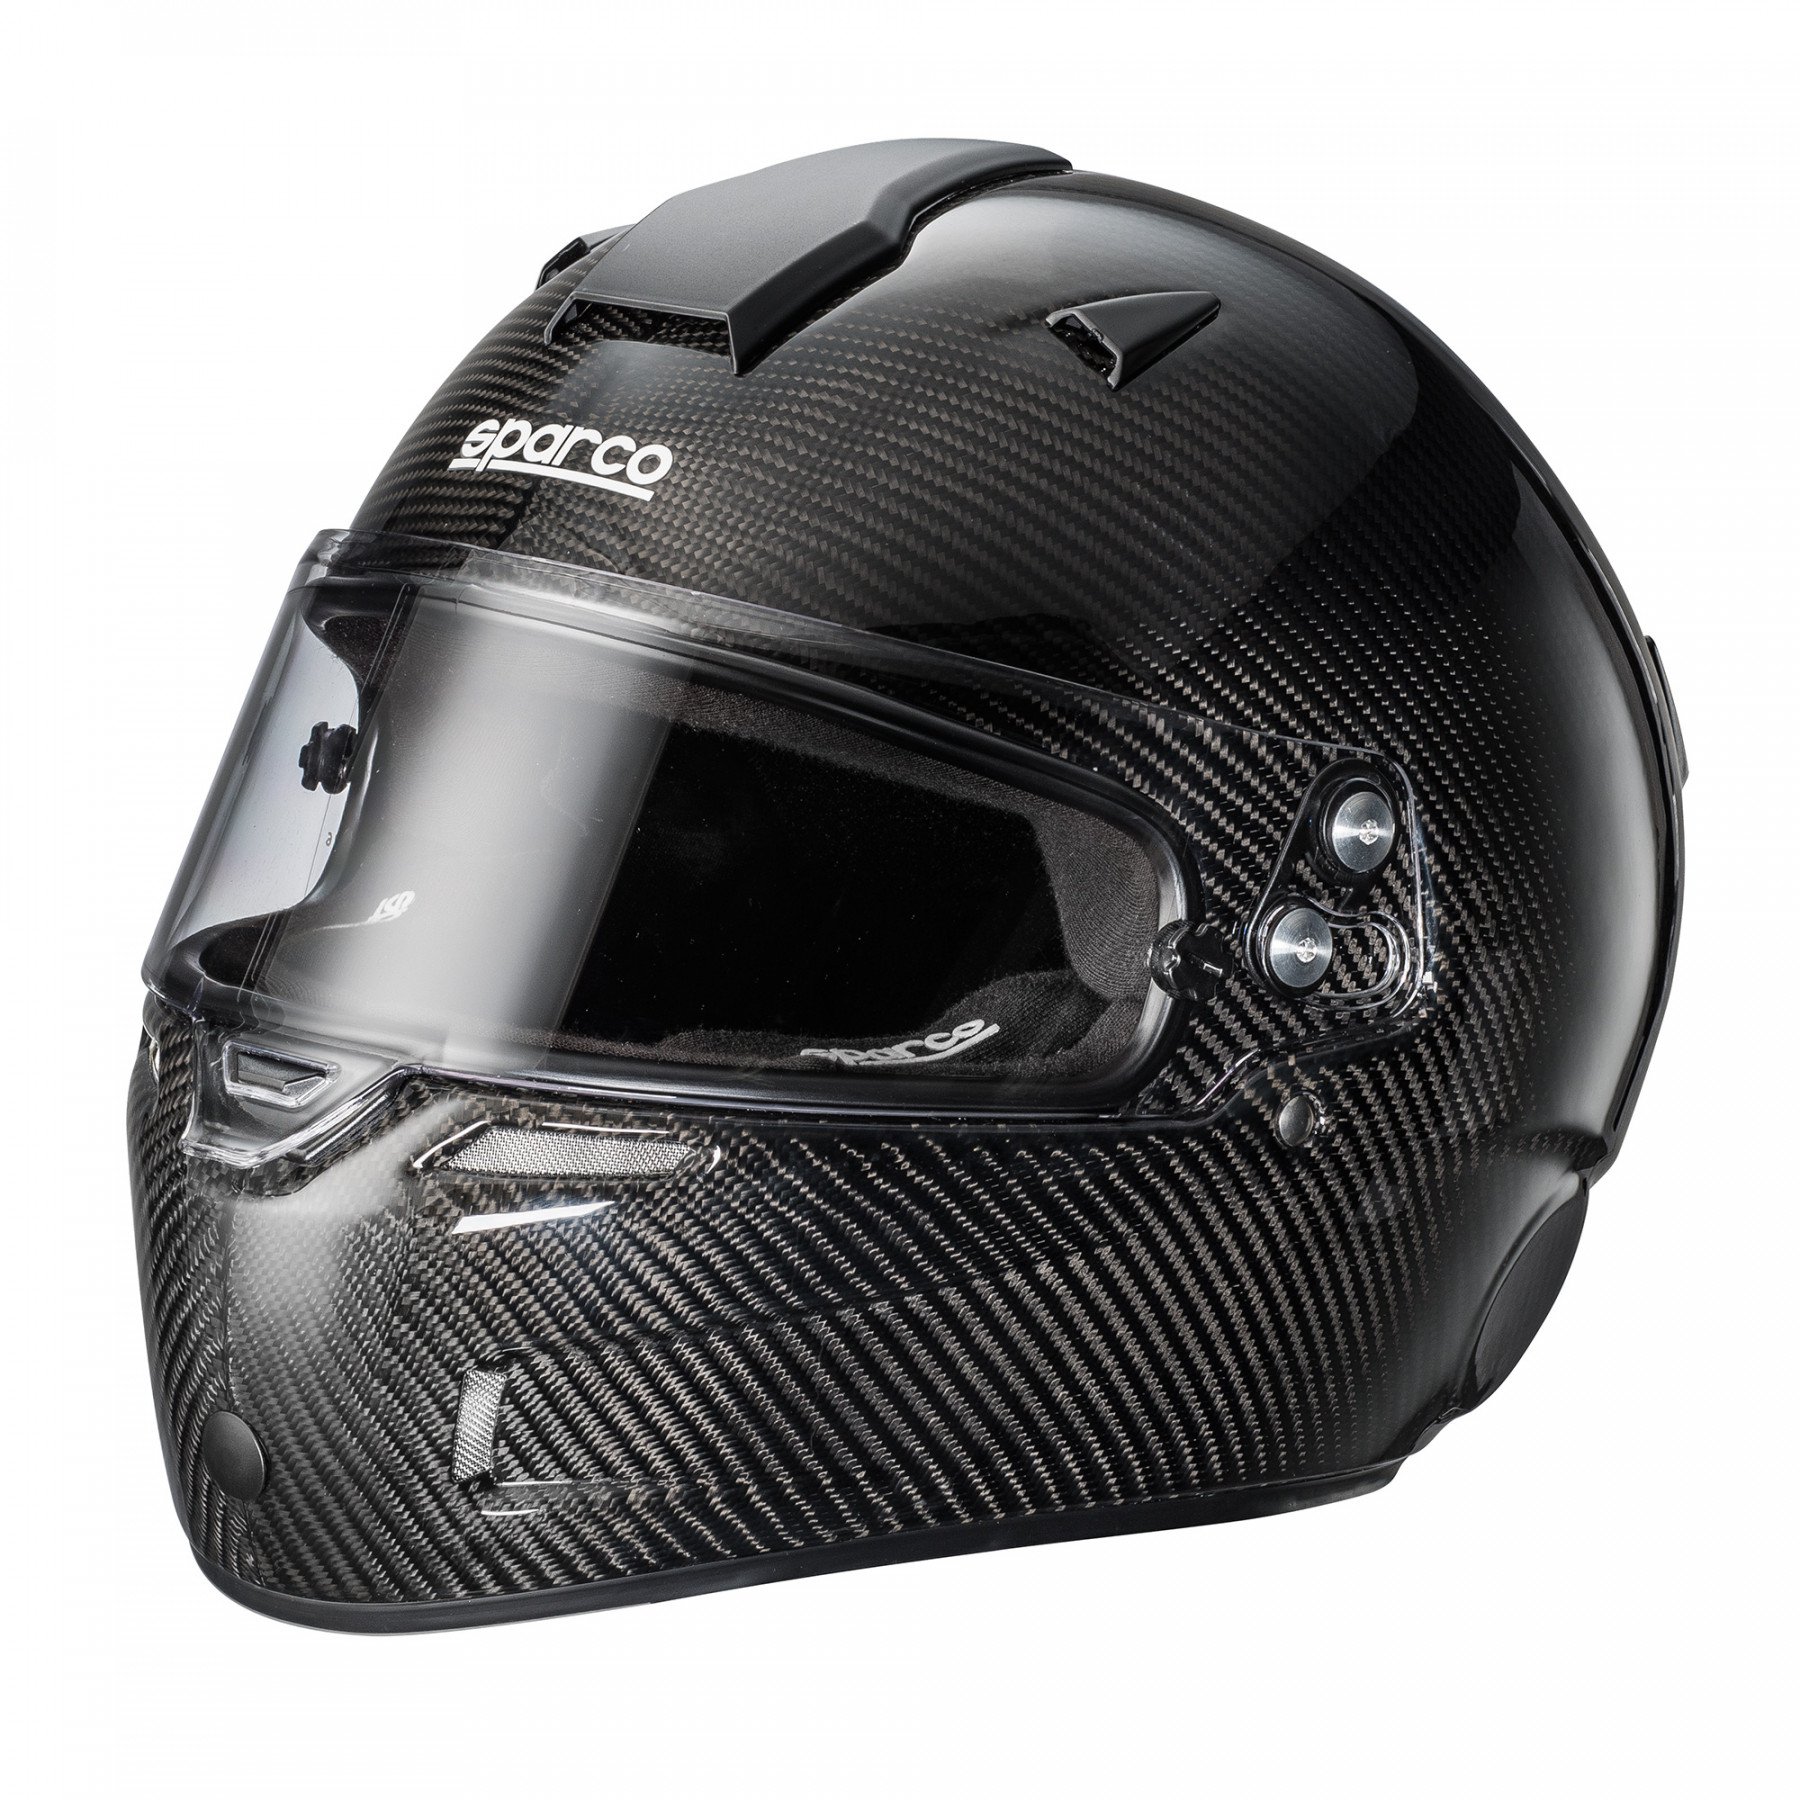 Hjelm Sparco KF-7w Carbon